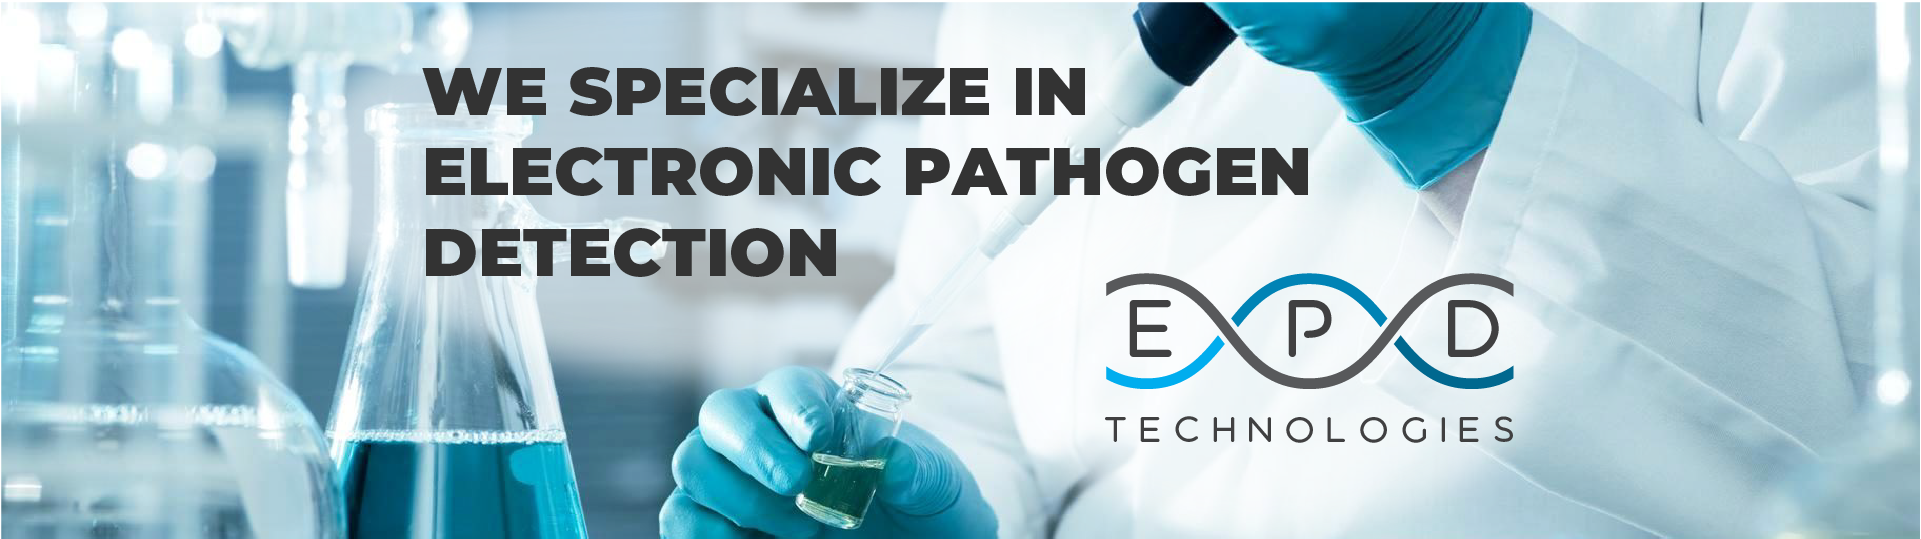 We specialize in Electronic Pathogen Detection